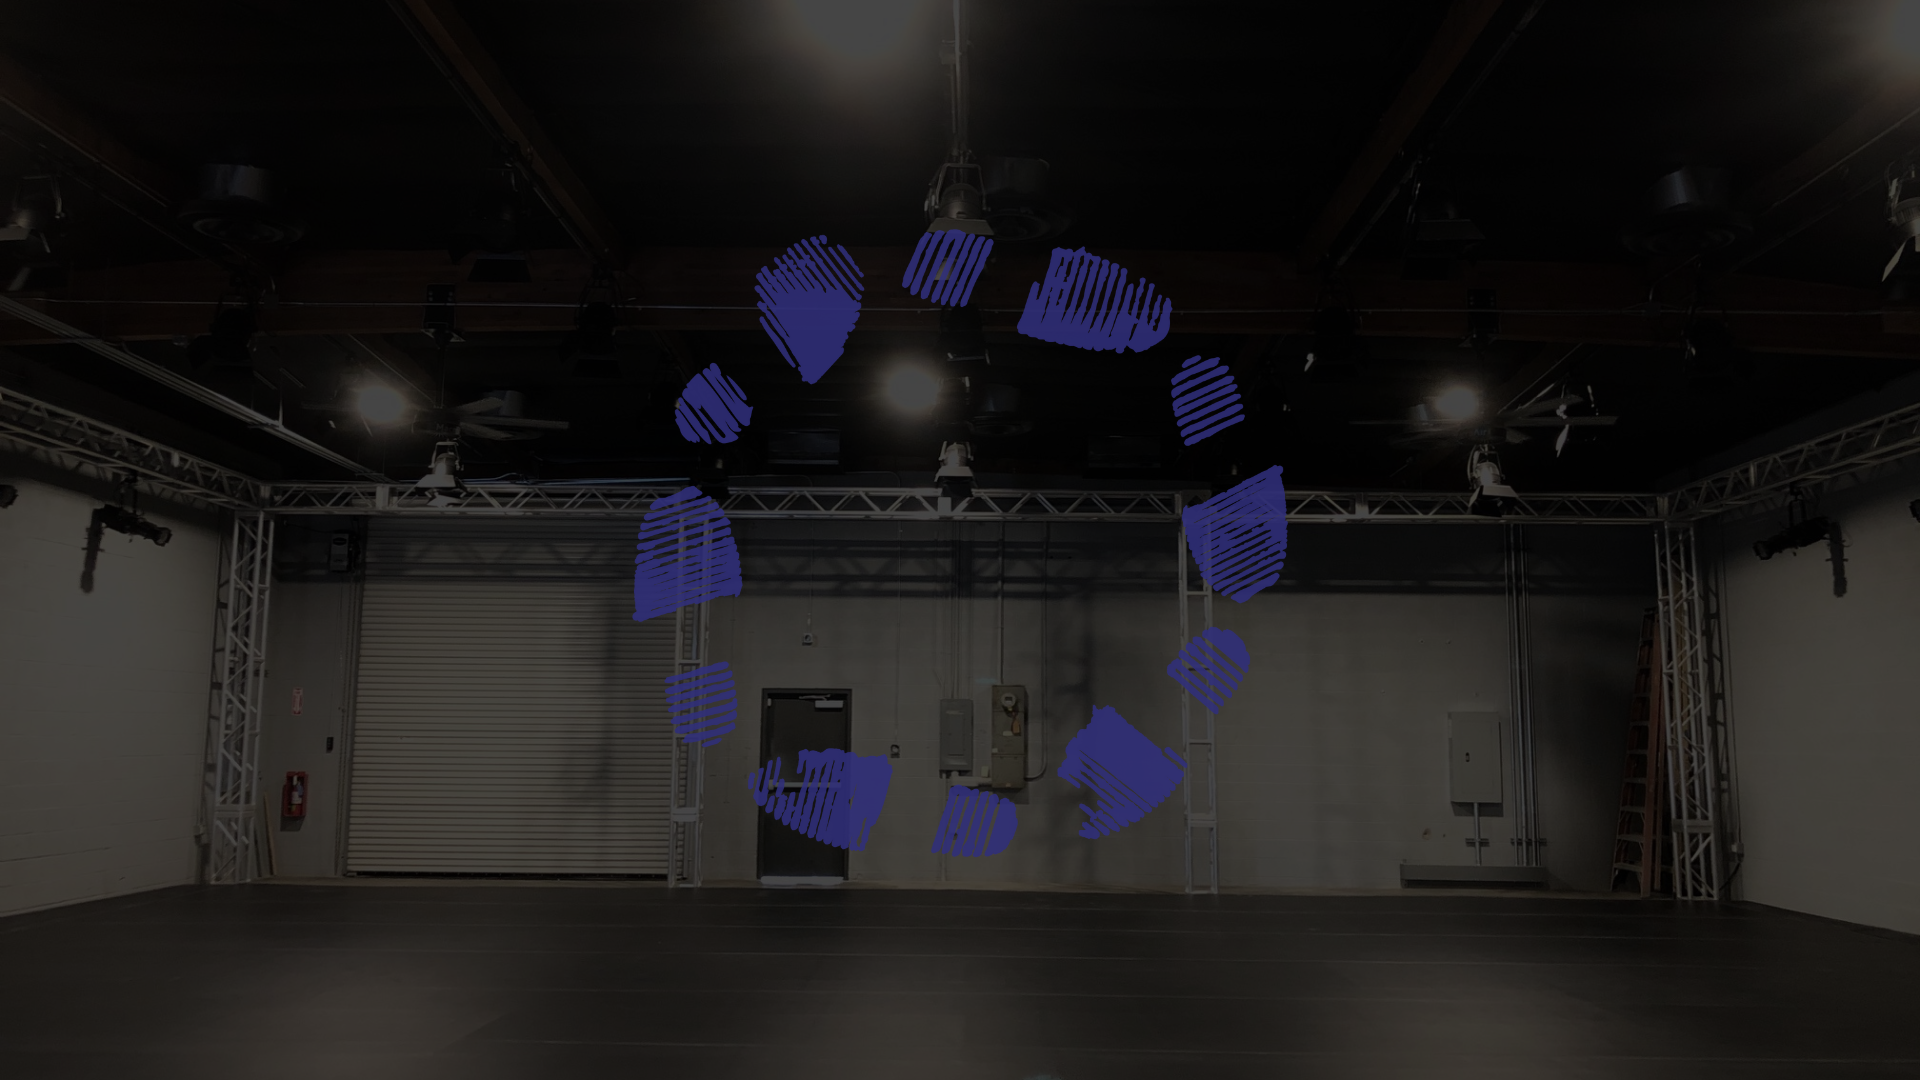 an image of the warehouse space overlaid with the stomping ground logo in blue